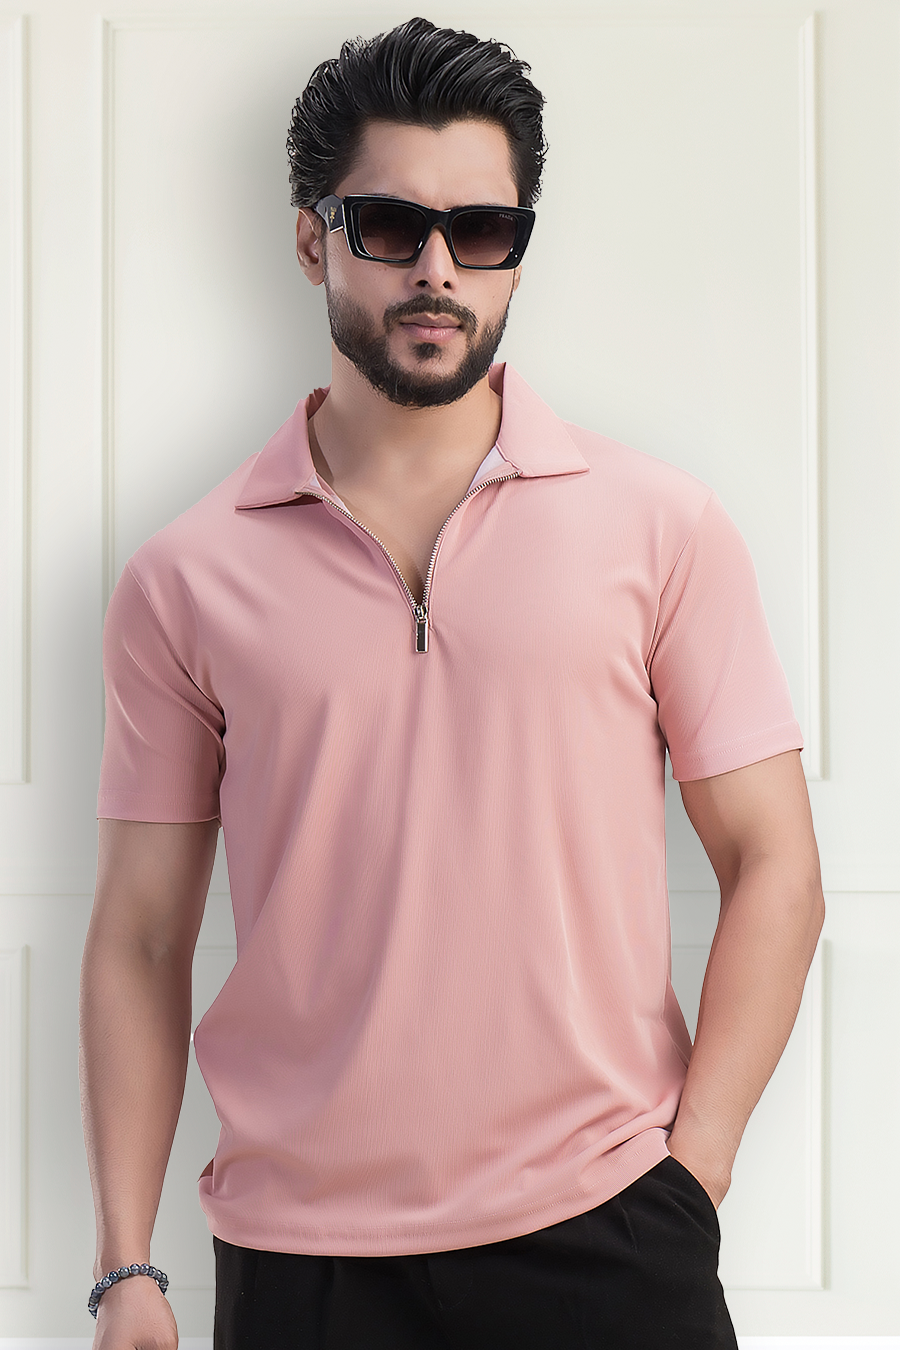 Opulent Solid Peach Half Sleeves Polo T-shirt